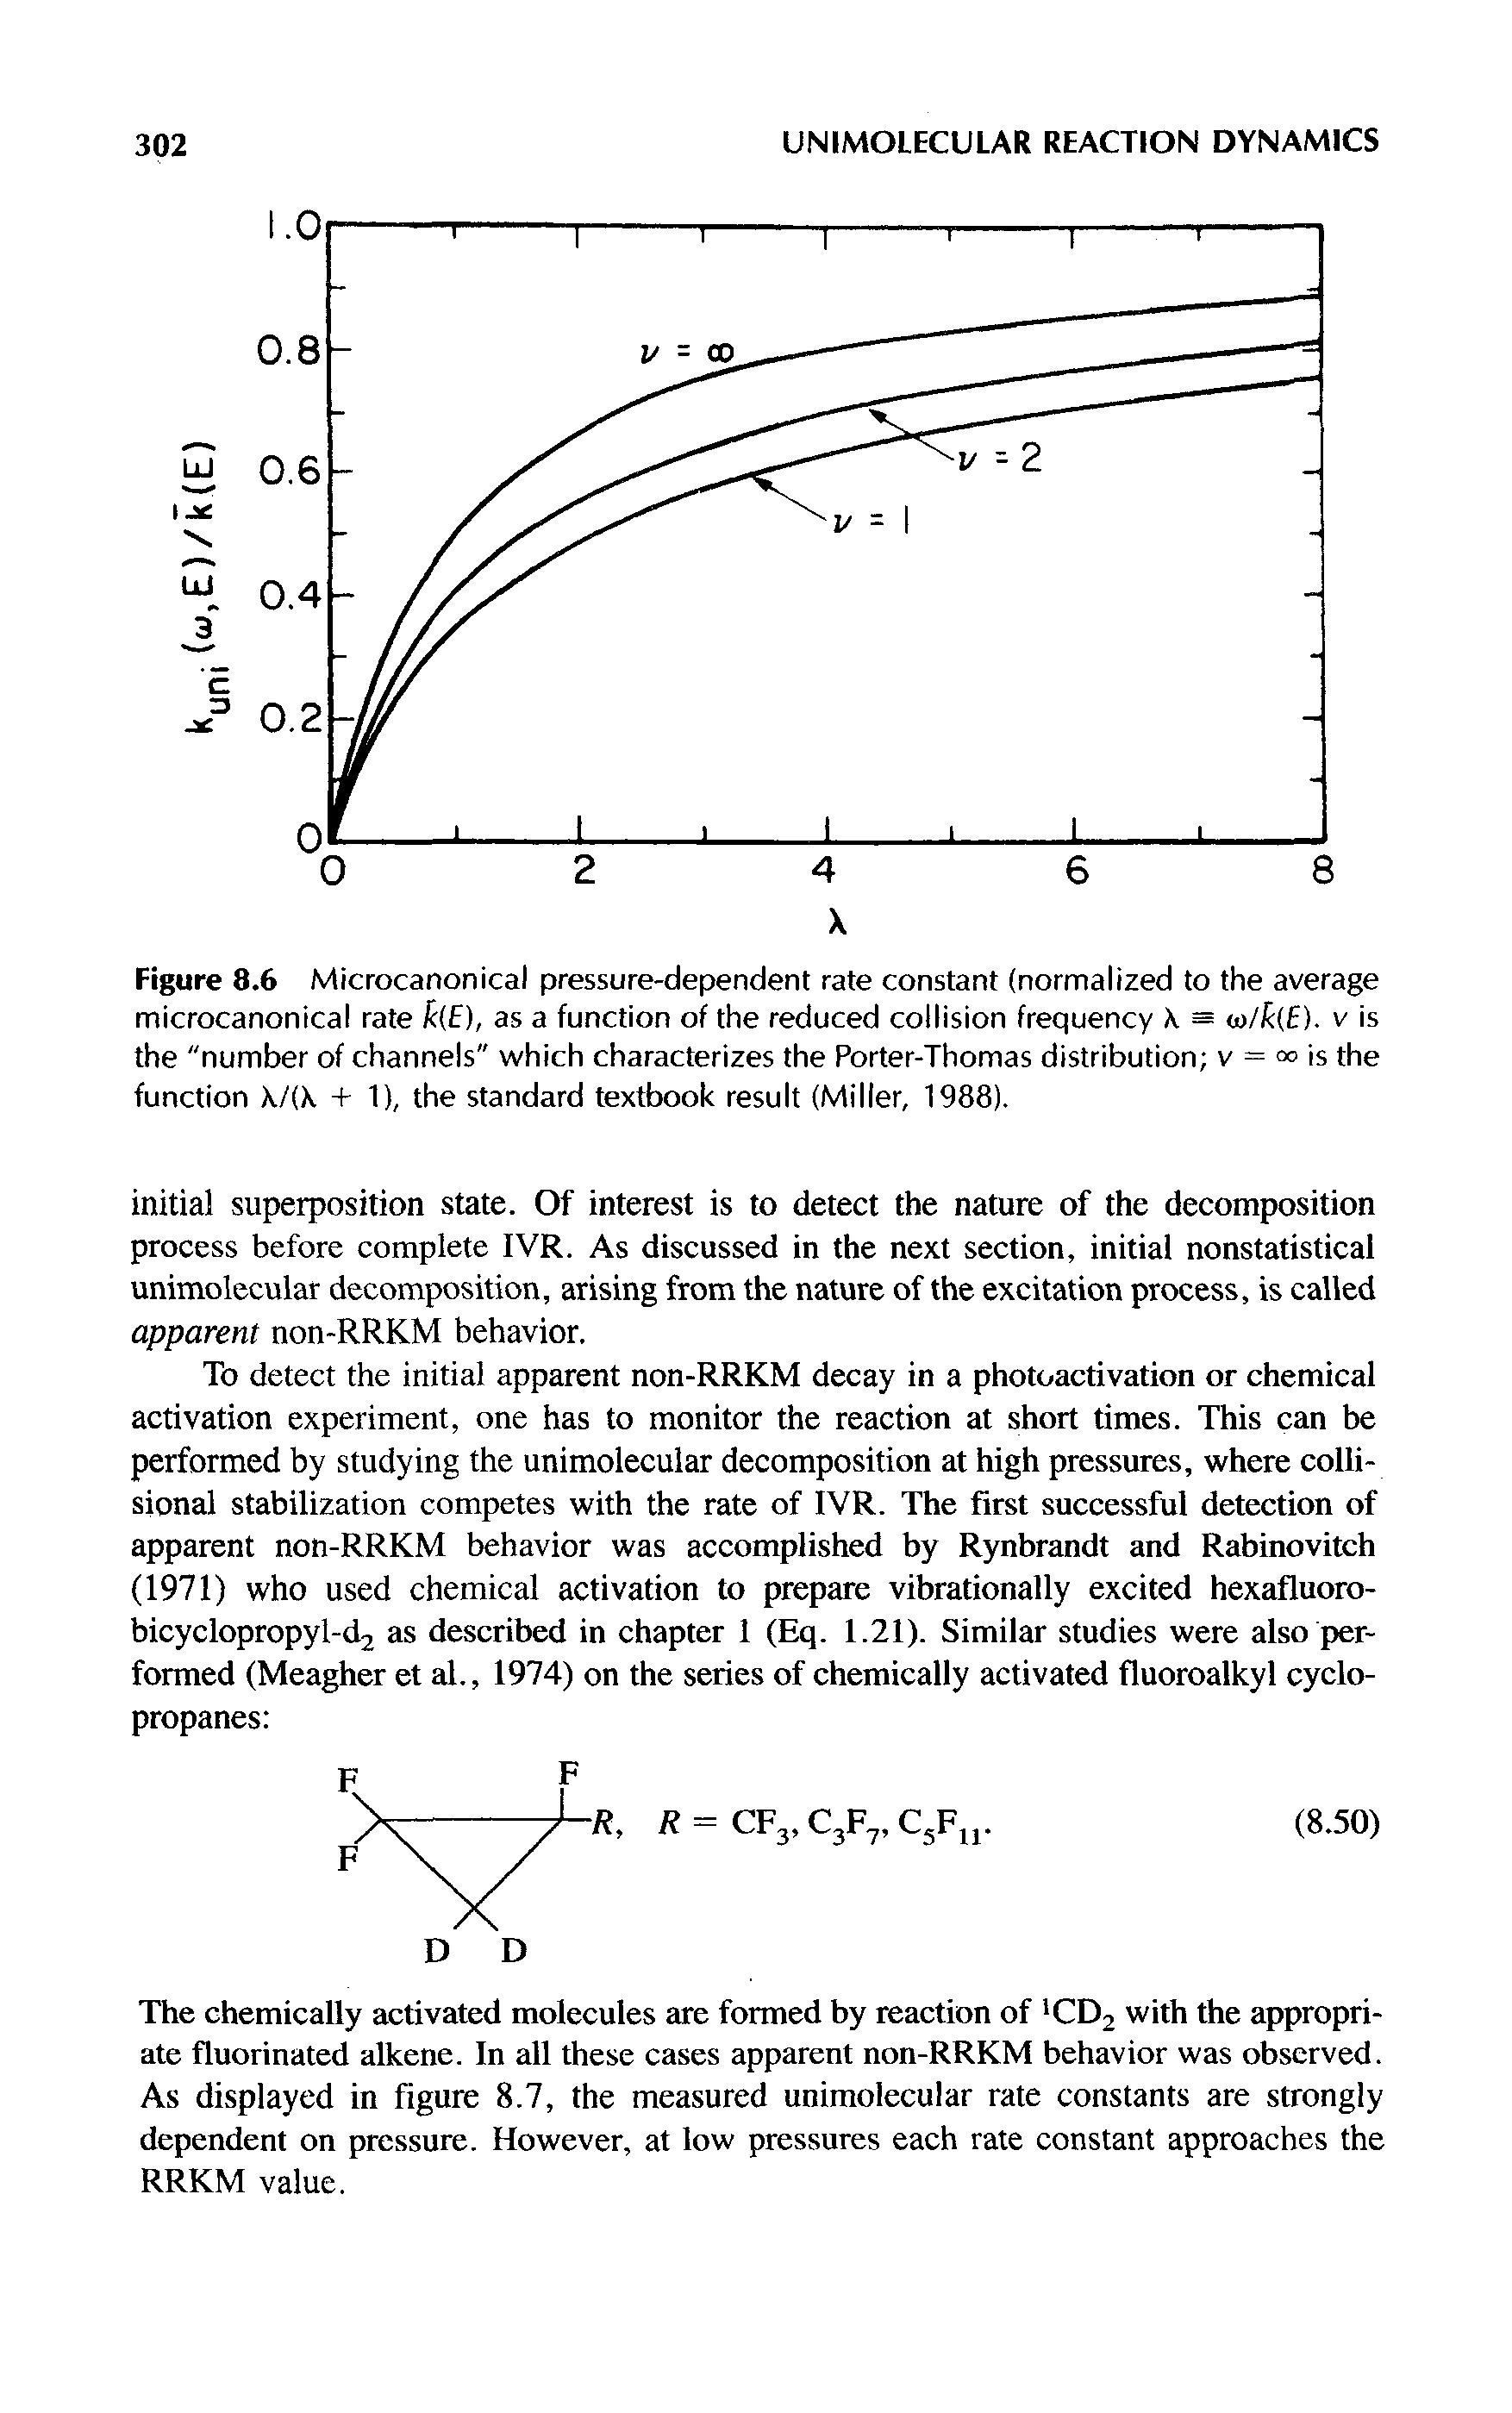 Figure 8.6 Microcanonical pressure-dependent rate constant (normalized to the average microcanonical rate /c(f), as a function of the reduced collision frequency = <j)/k(E). v is the "number of channels" which characterizes the Porter-Thomas distribution v = is the function X/( -f- 1), the standard textbook result (Miller, 1988).